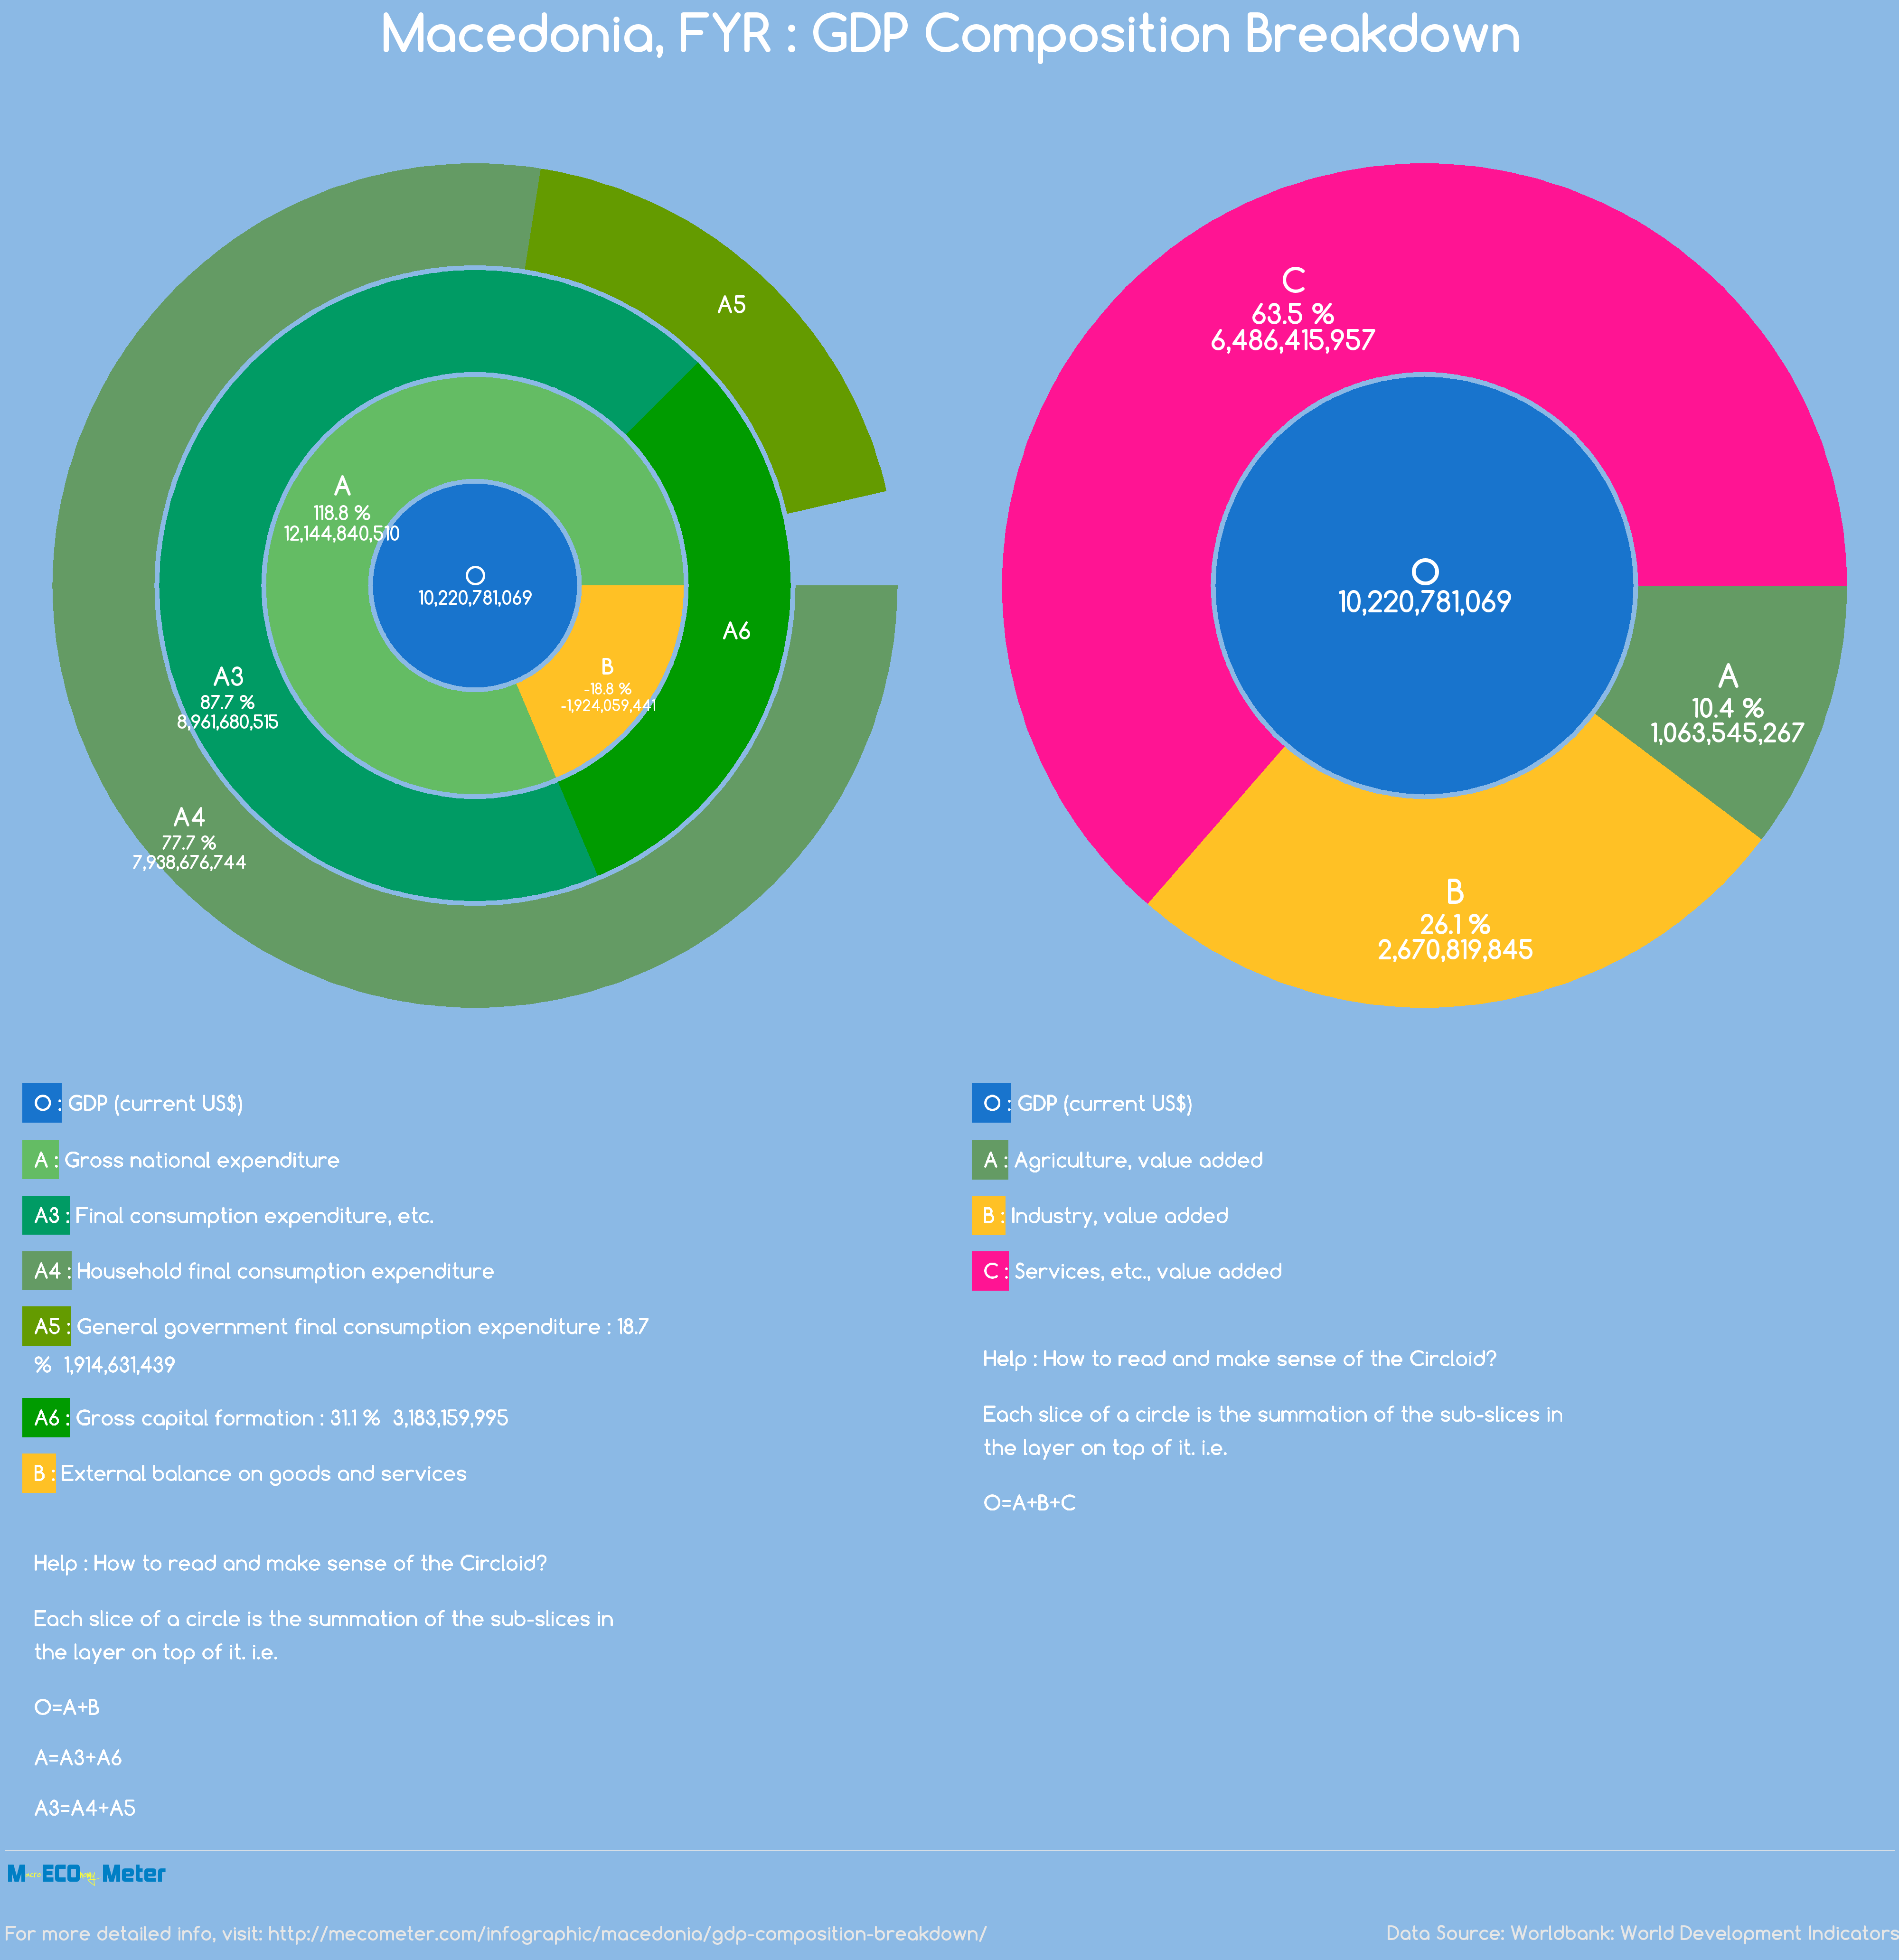 Macedonia : GDP Composition Breakdown